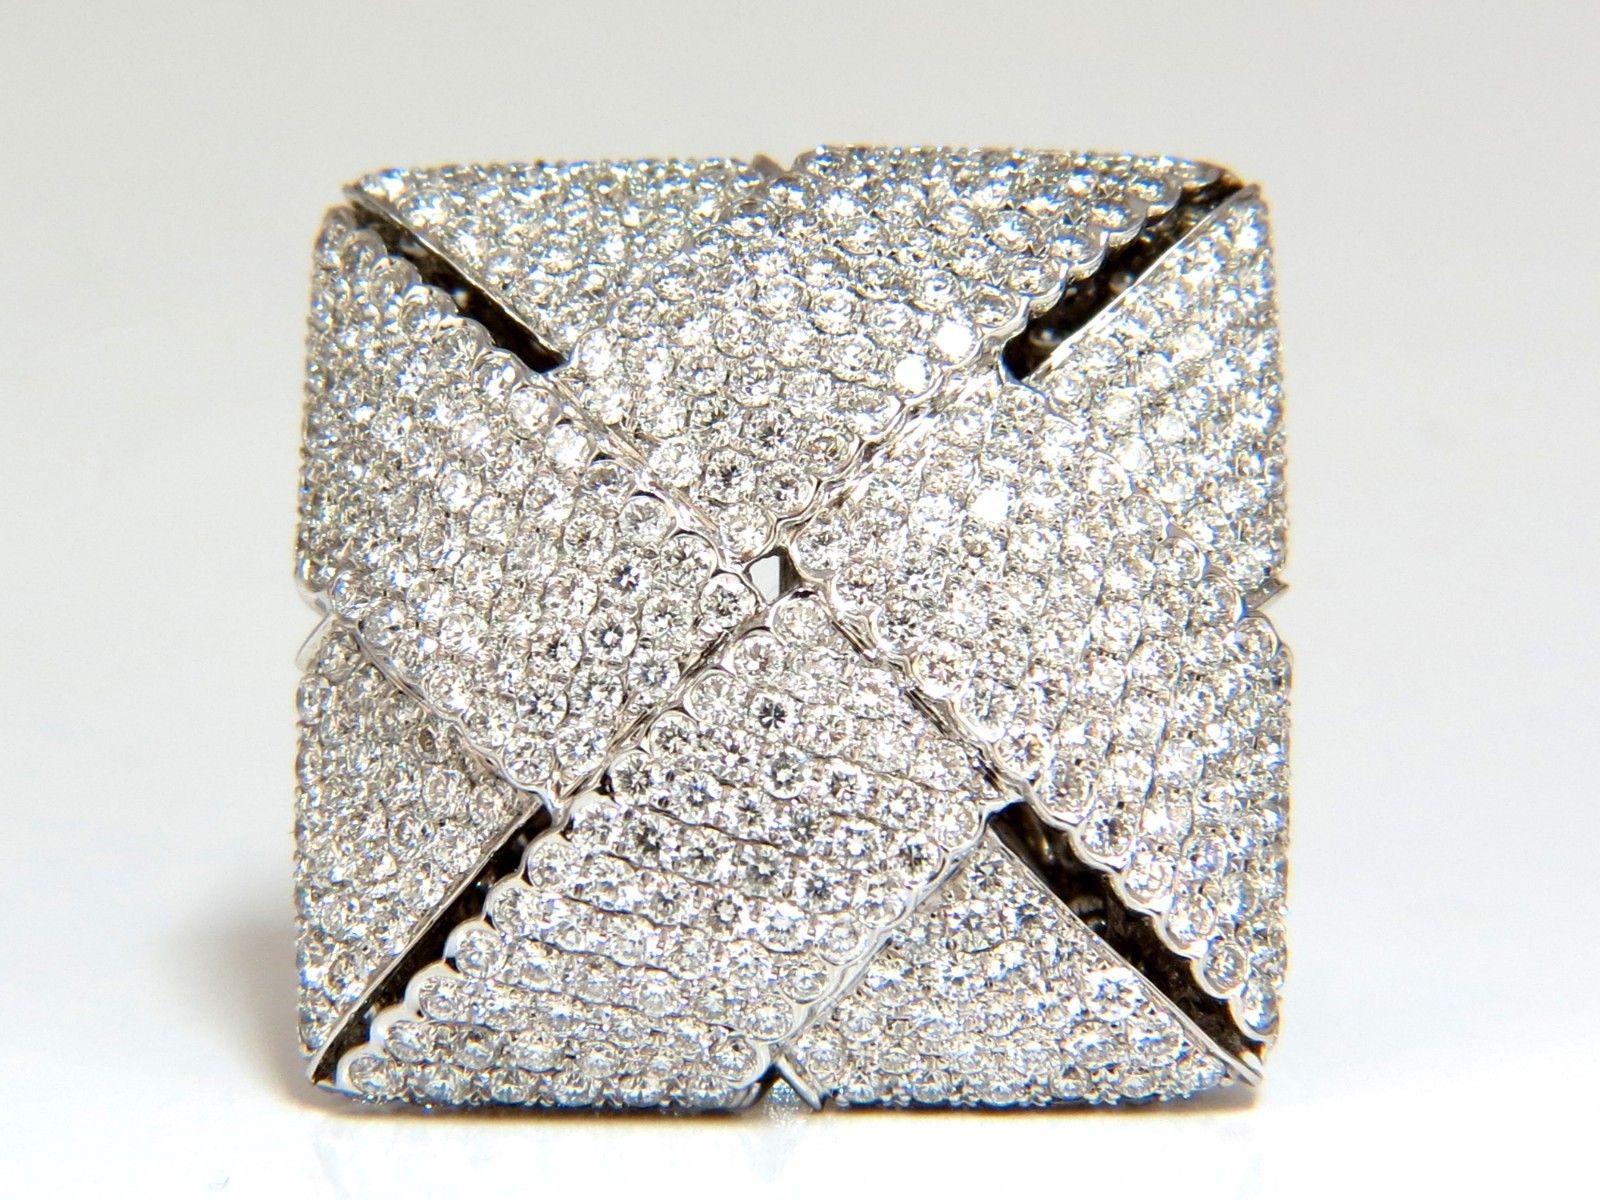 Contemporary three dimensional ring.


Unisex Cross Weave Pattern

7.15ct. Natural brilliant round diamonds
Vs-2 clarity  F color.

550 diamonds count

18kt white gold.

24 Grams

Overall ring: 1.07 x 1.09 inch 

11mm depth

Current ring size: